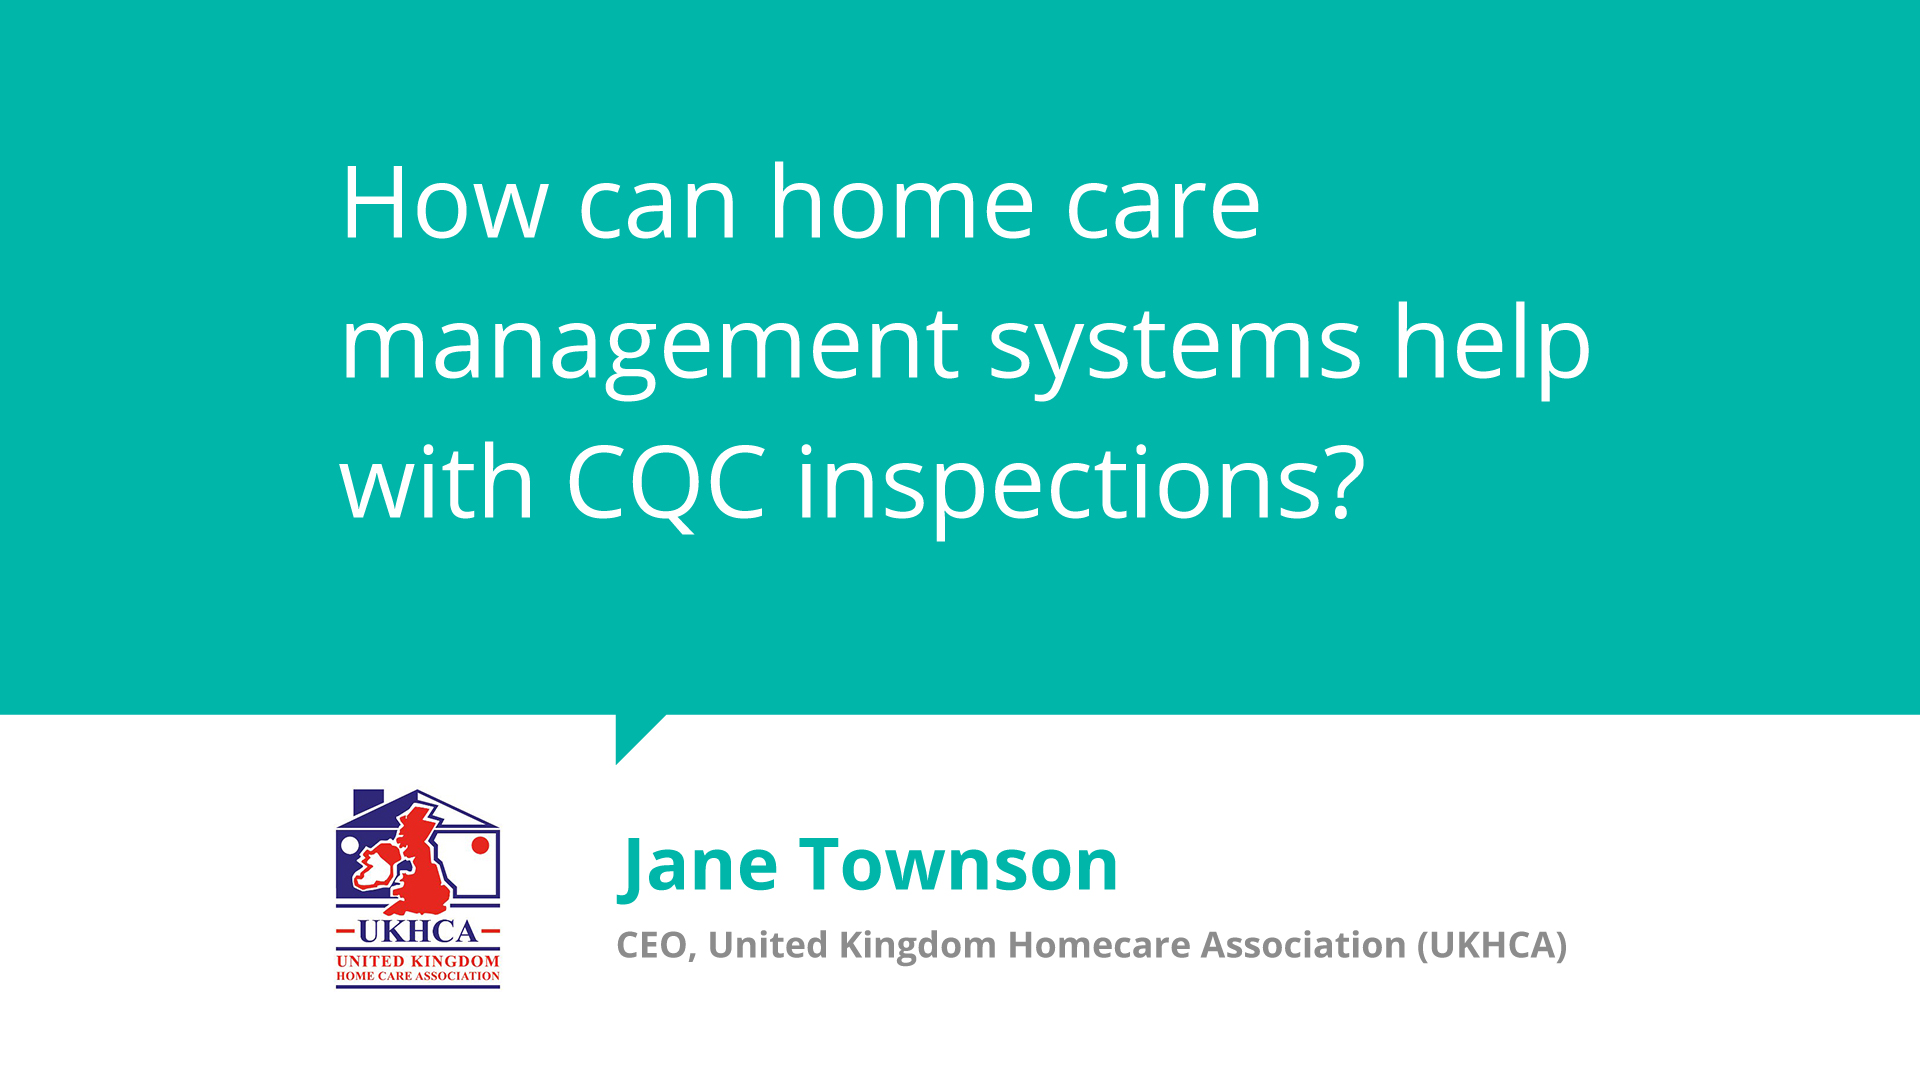 Jane Townson, UKHCA CEO, talks about how home care software can help with CQC inspections